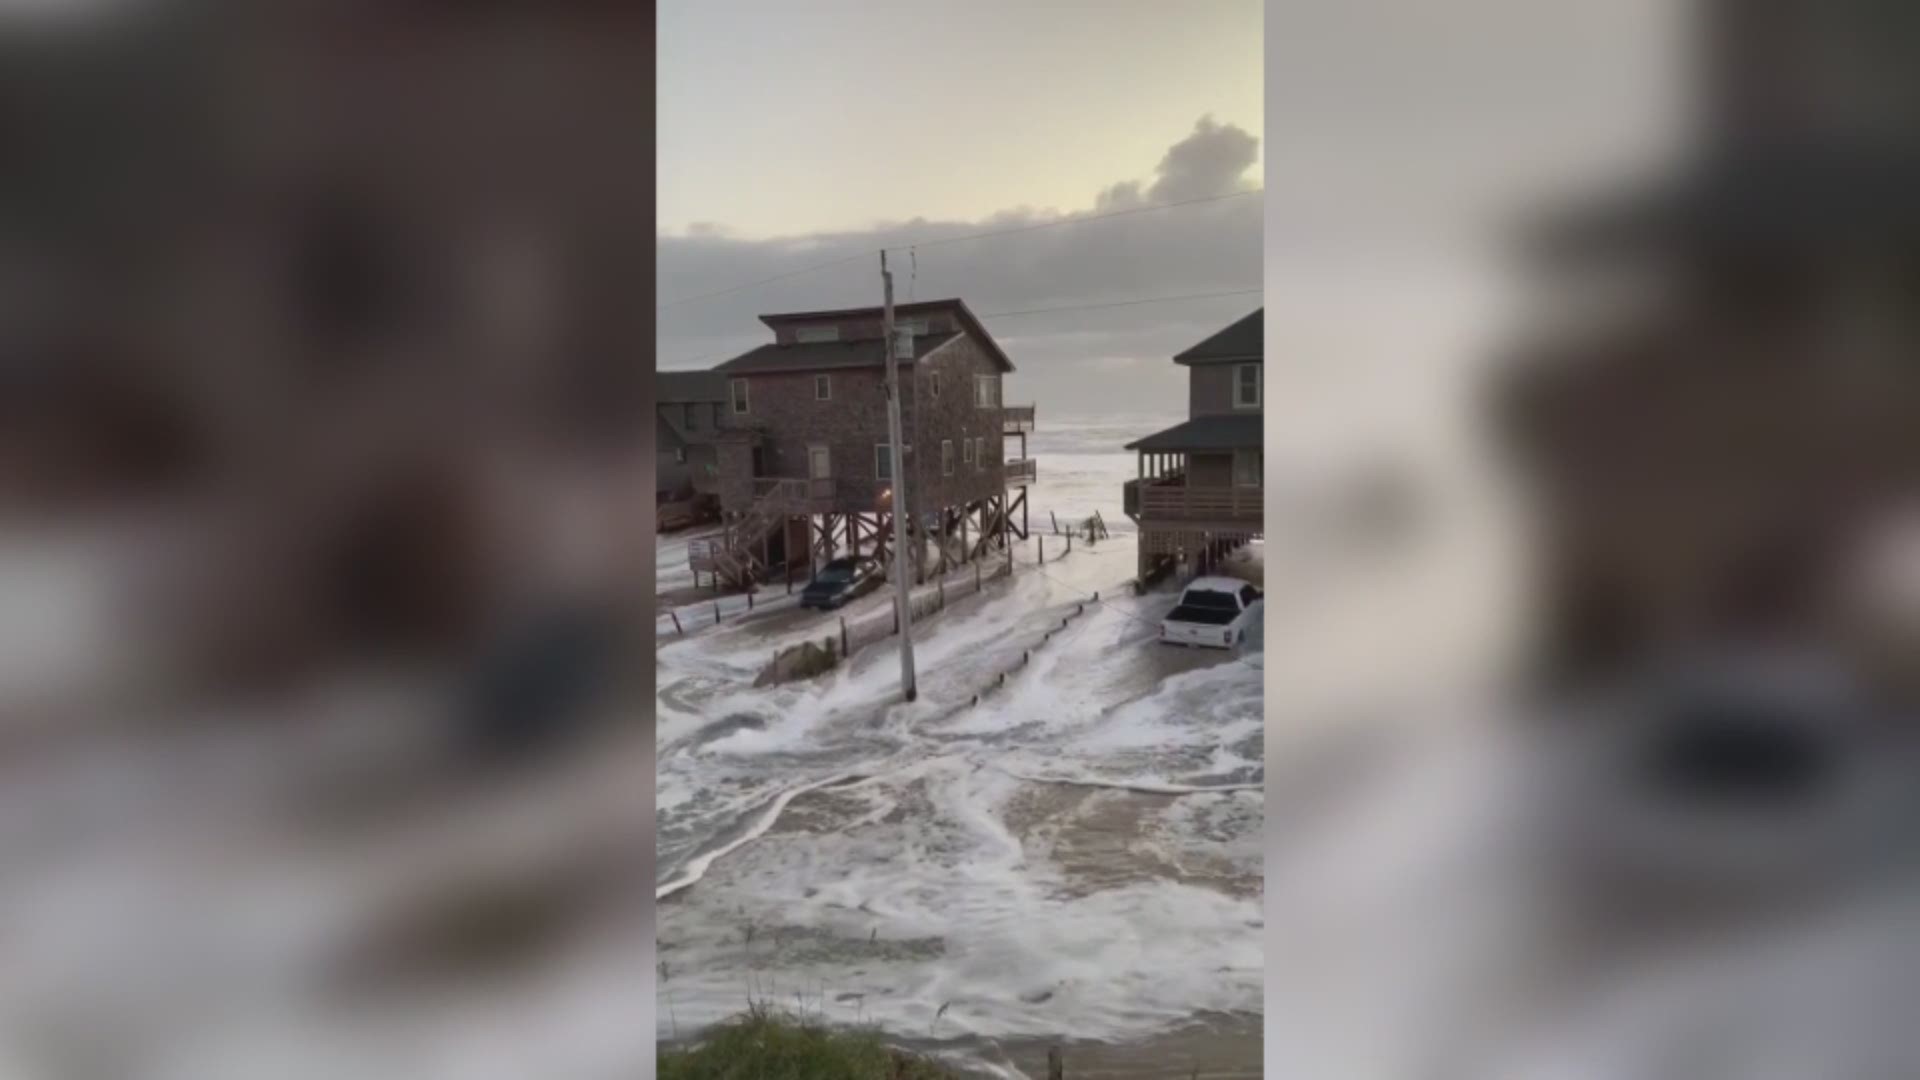 High tide overwash in the Outer Banks caused flooding and parts of NC-12 near Rodanthe to shut down. (VIDEO CREDIT: Tammy Rutherford/Facebook)